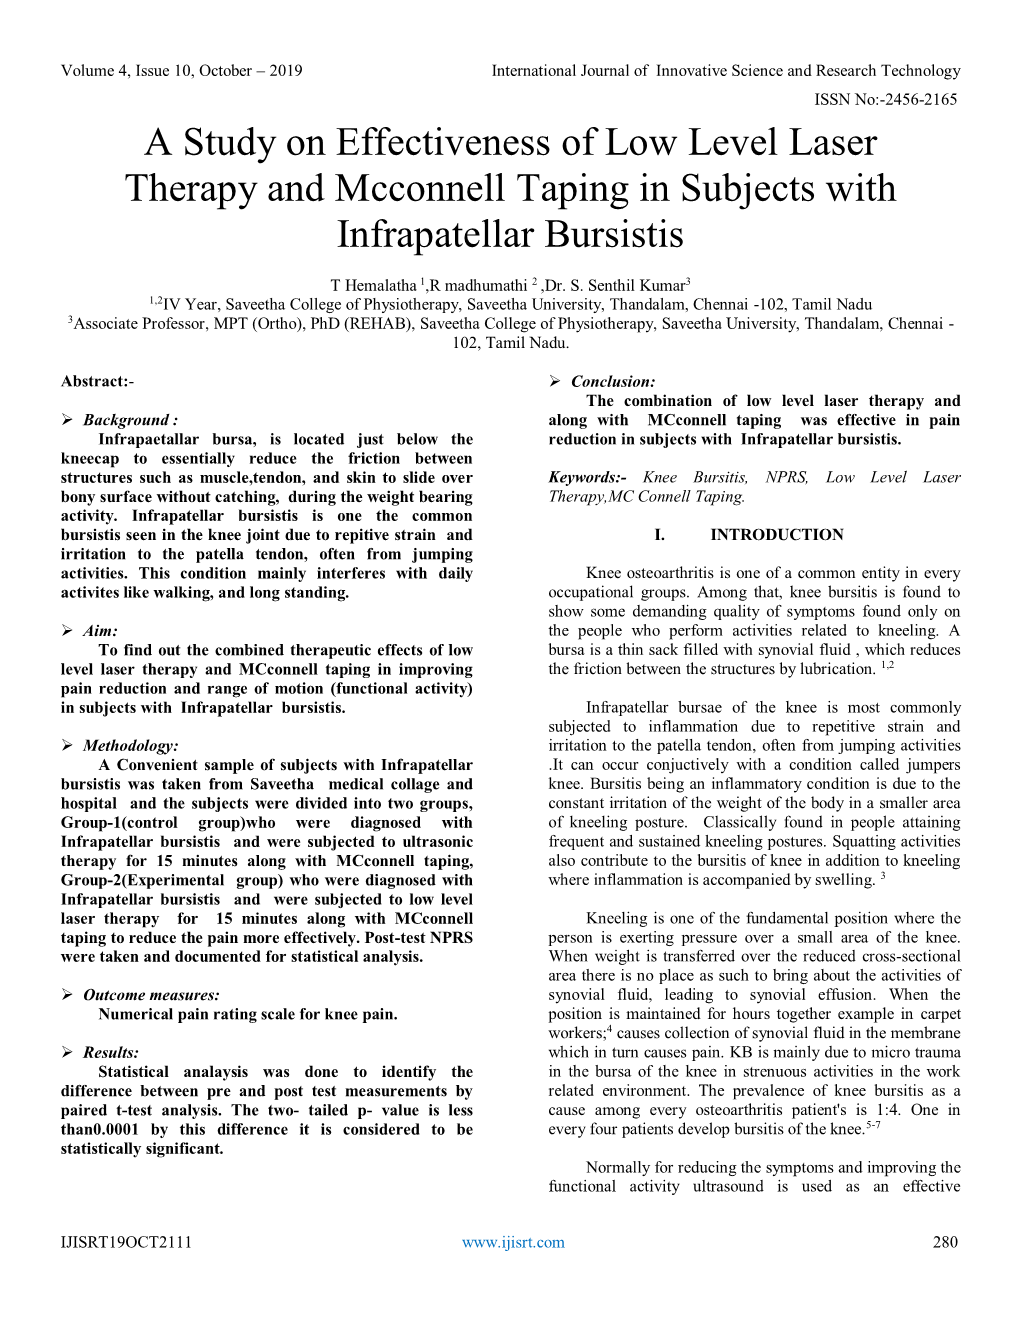 A Study on Effectiveness of Low Level Laser Therapy and Mcconnell Taping in Subjects with Infrapatellar Bursistis